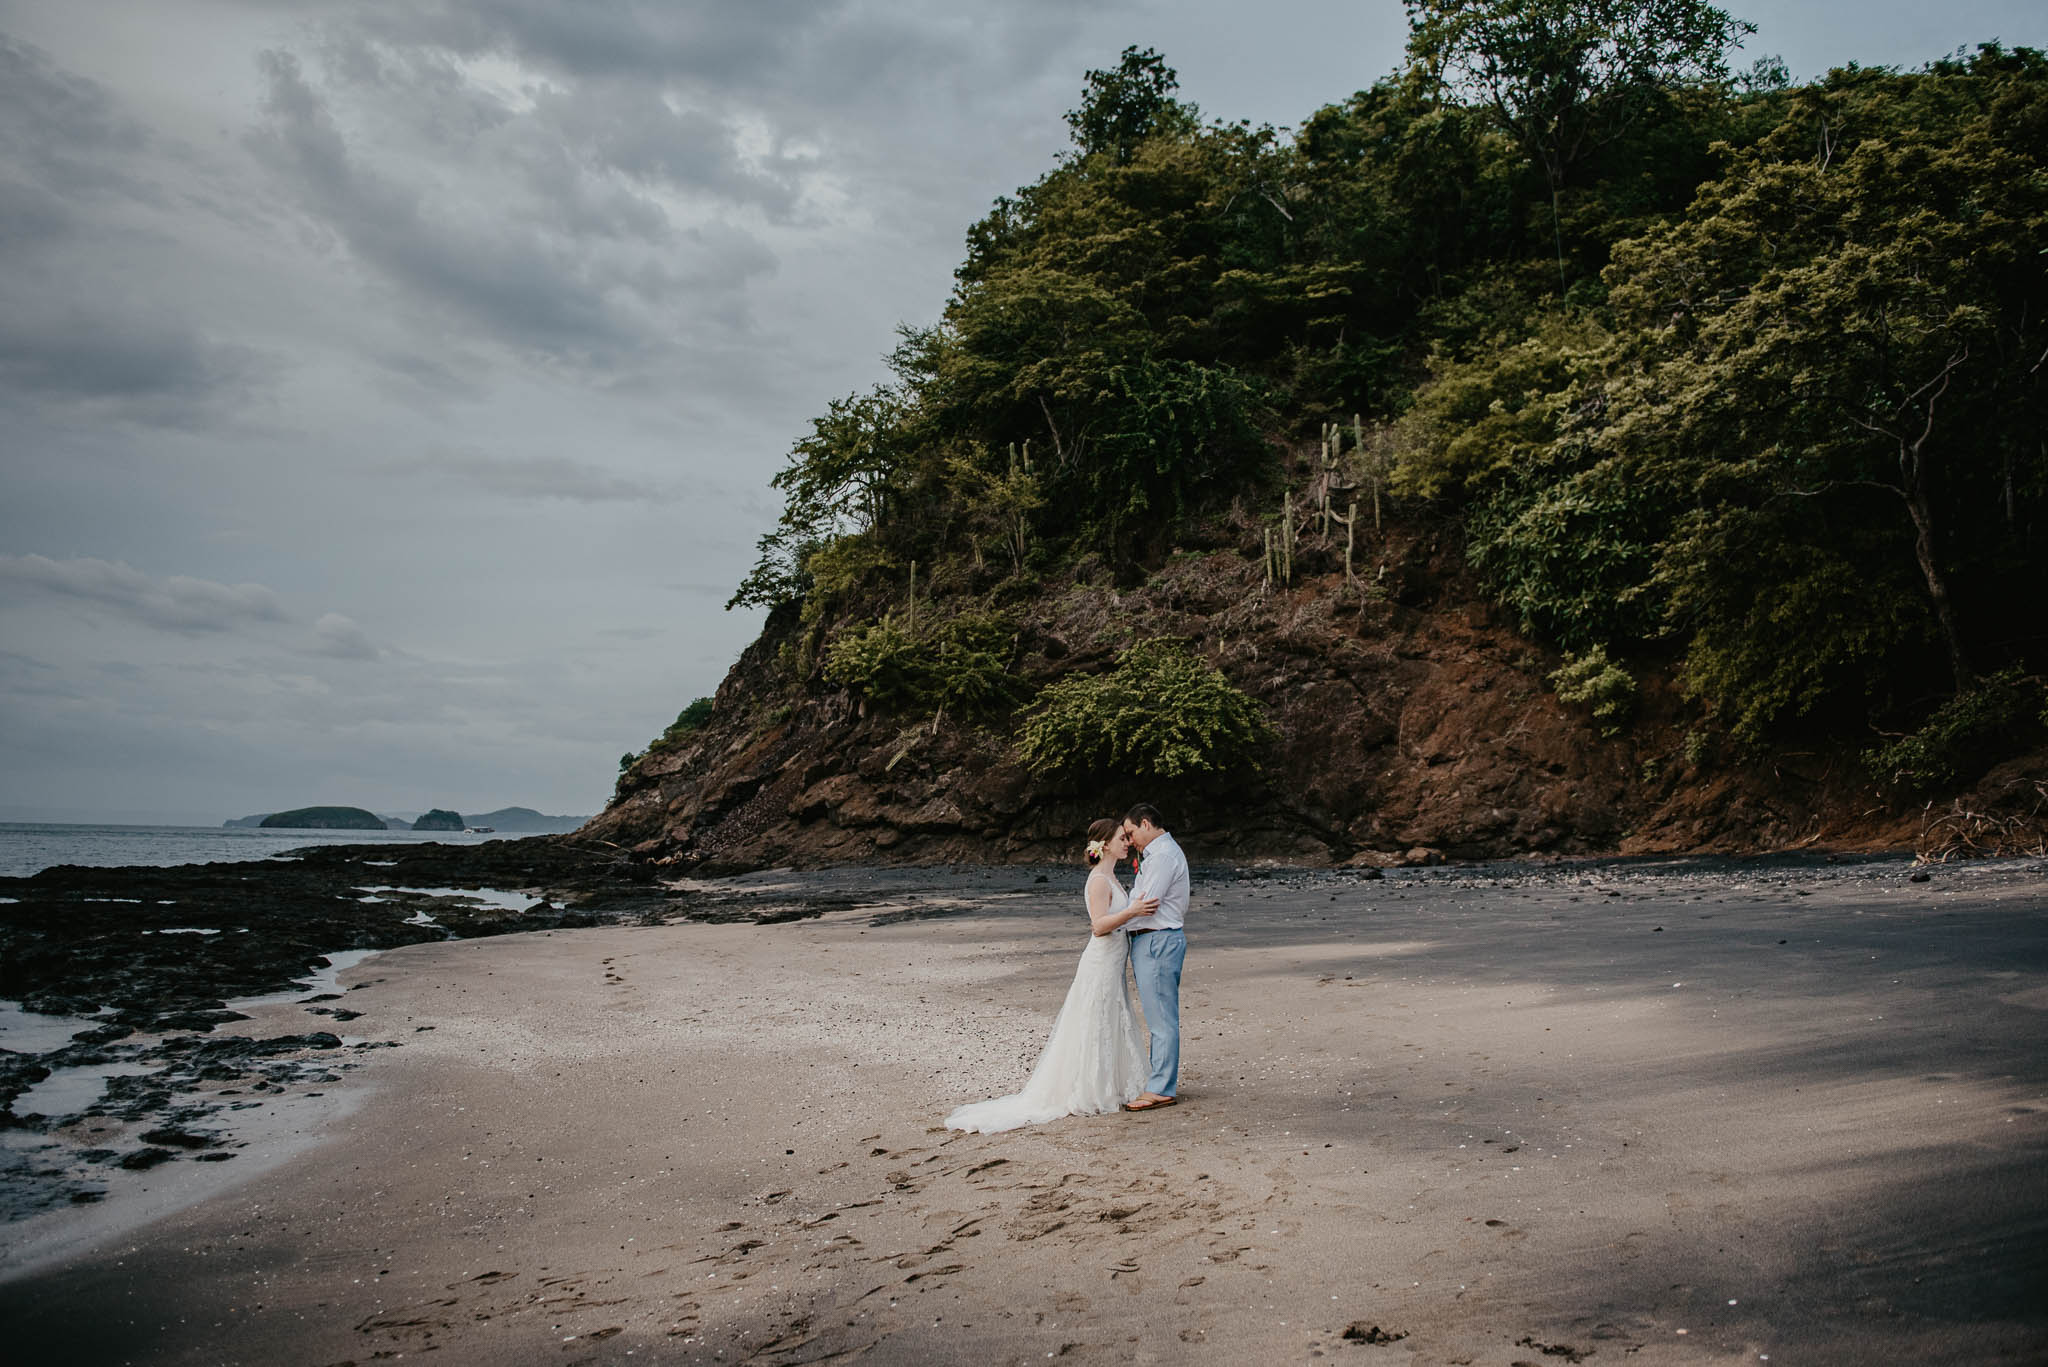 Newlyweds photo session in Costa Rica beach